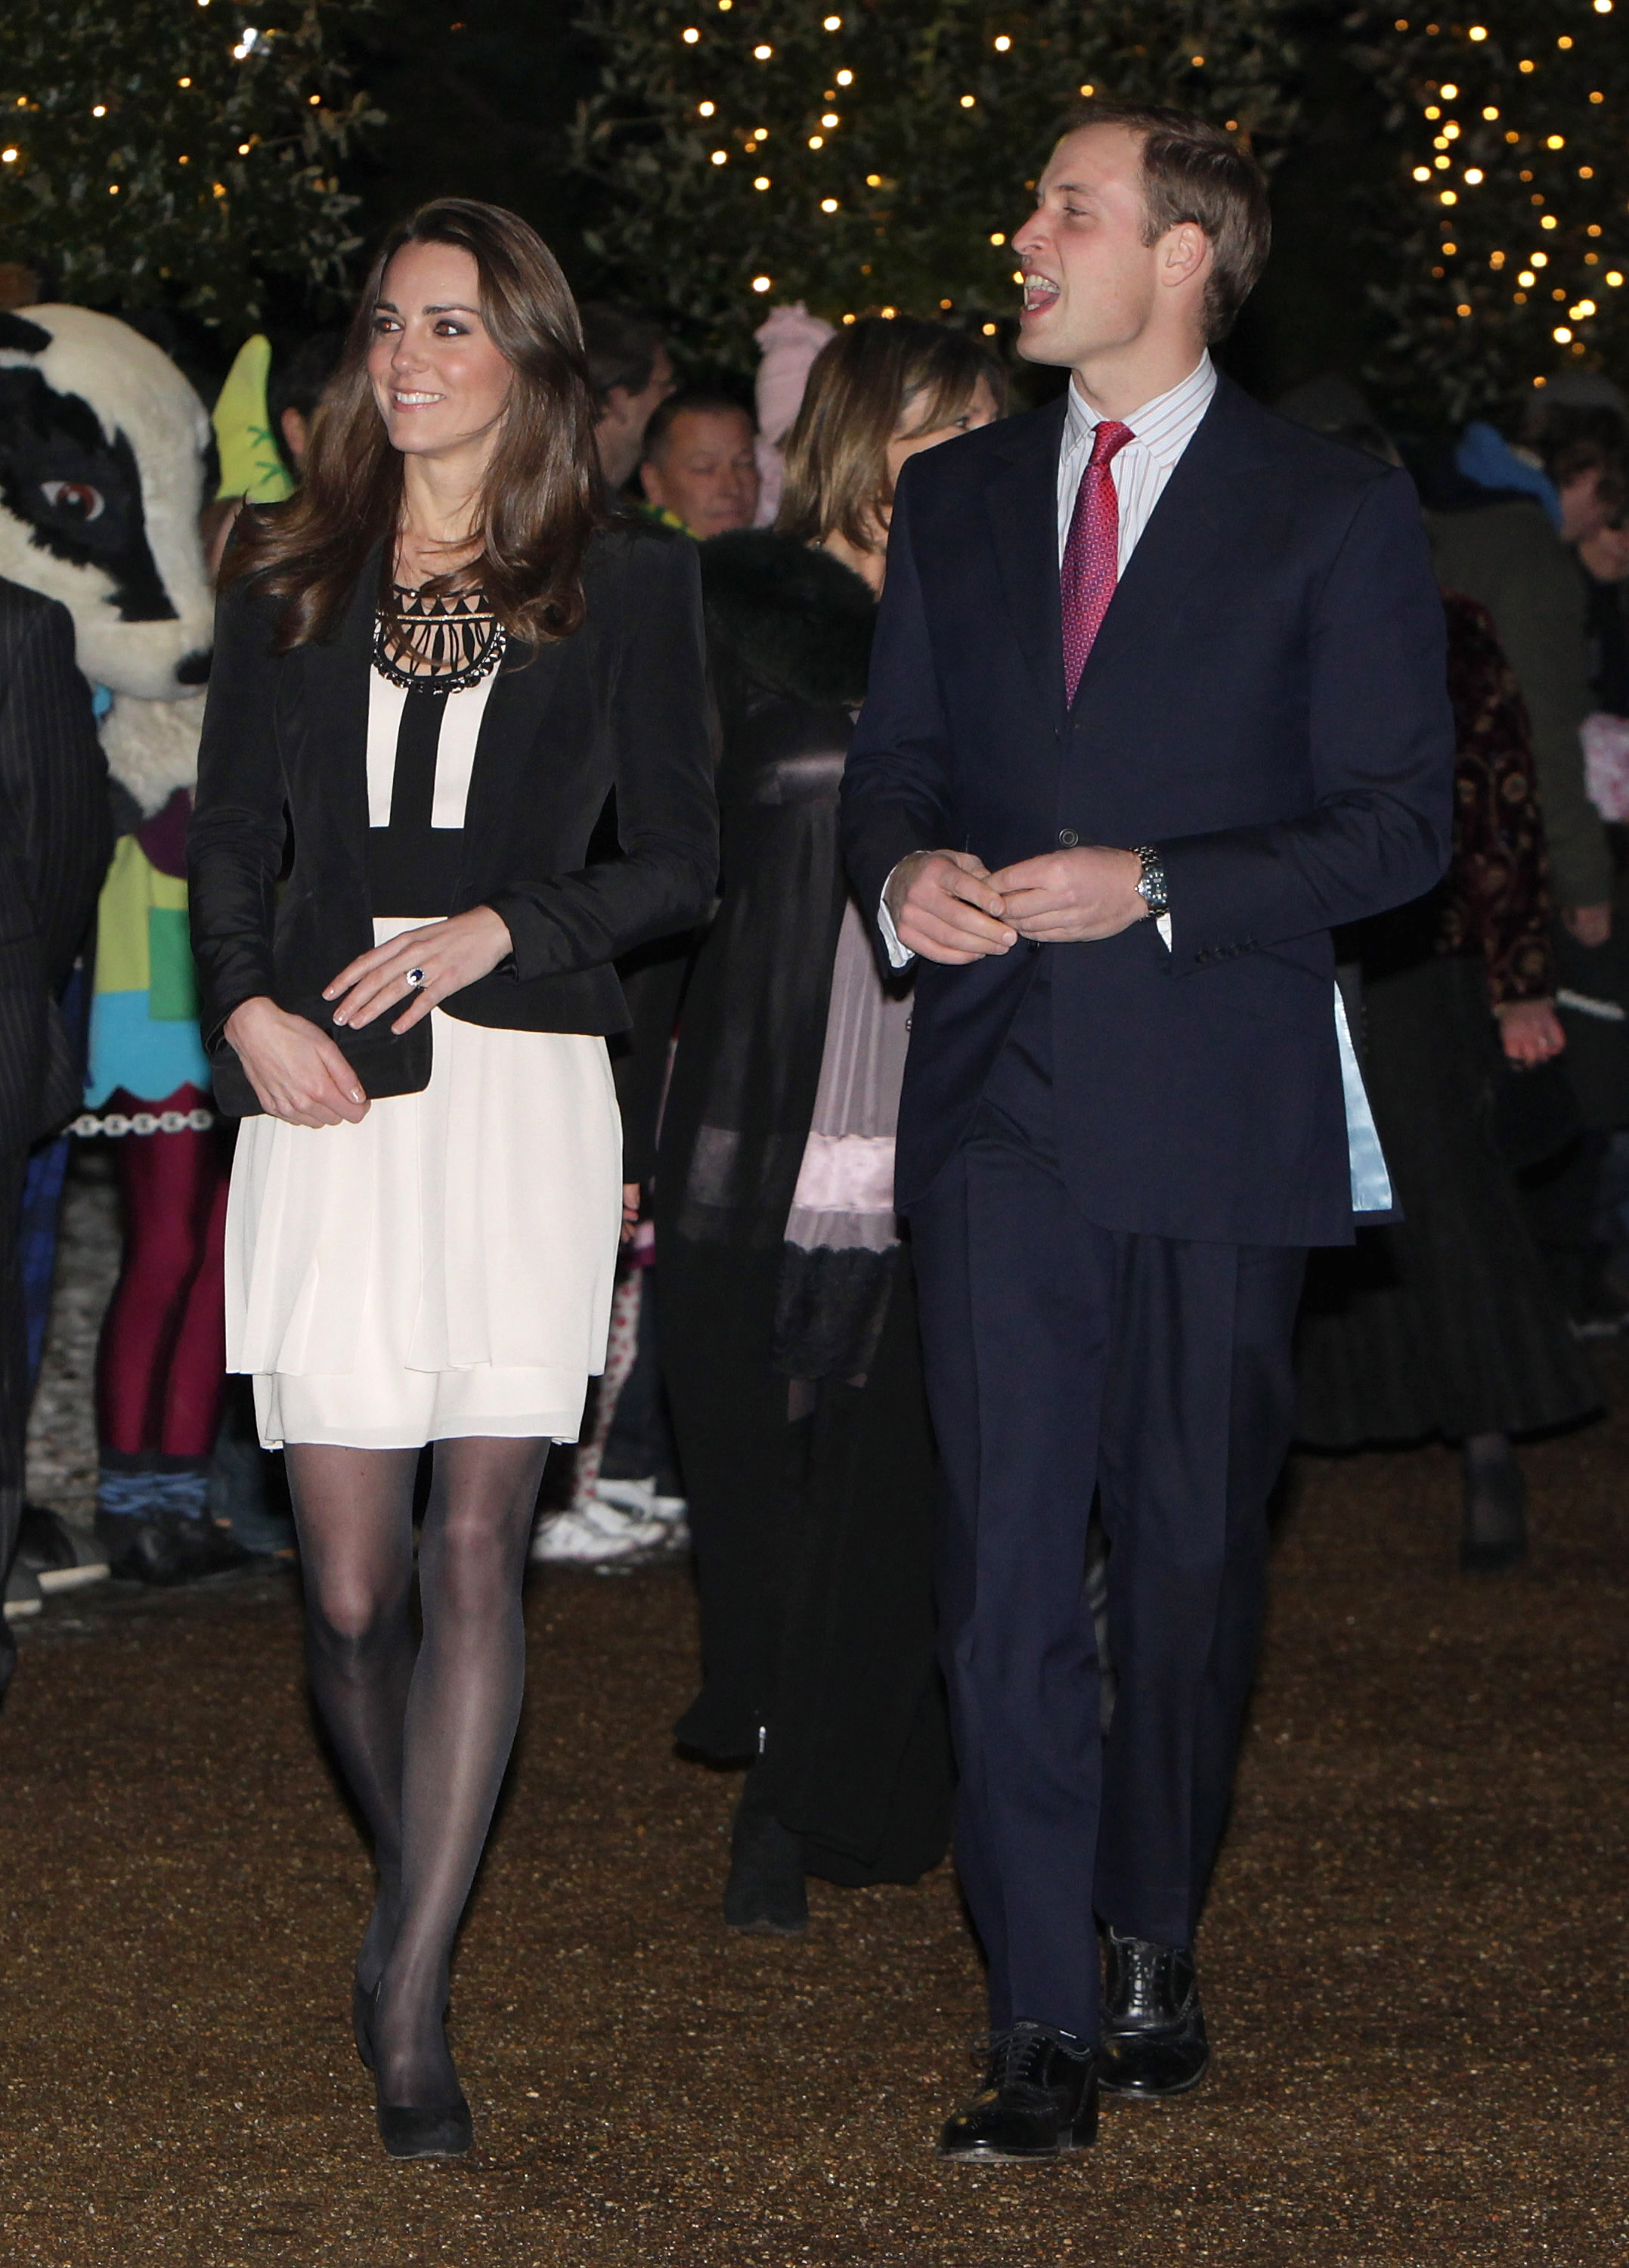 Prince William and Catherine Middleton attend a Christmas reception in aid of the Teenager Cancer Trust on December 18, 2010 in Fakenham, England | Source: Getty Images